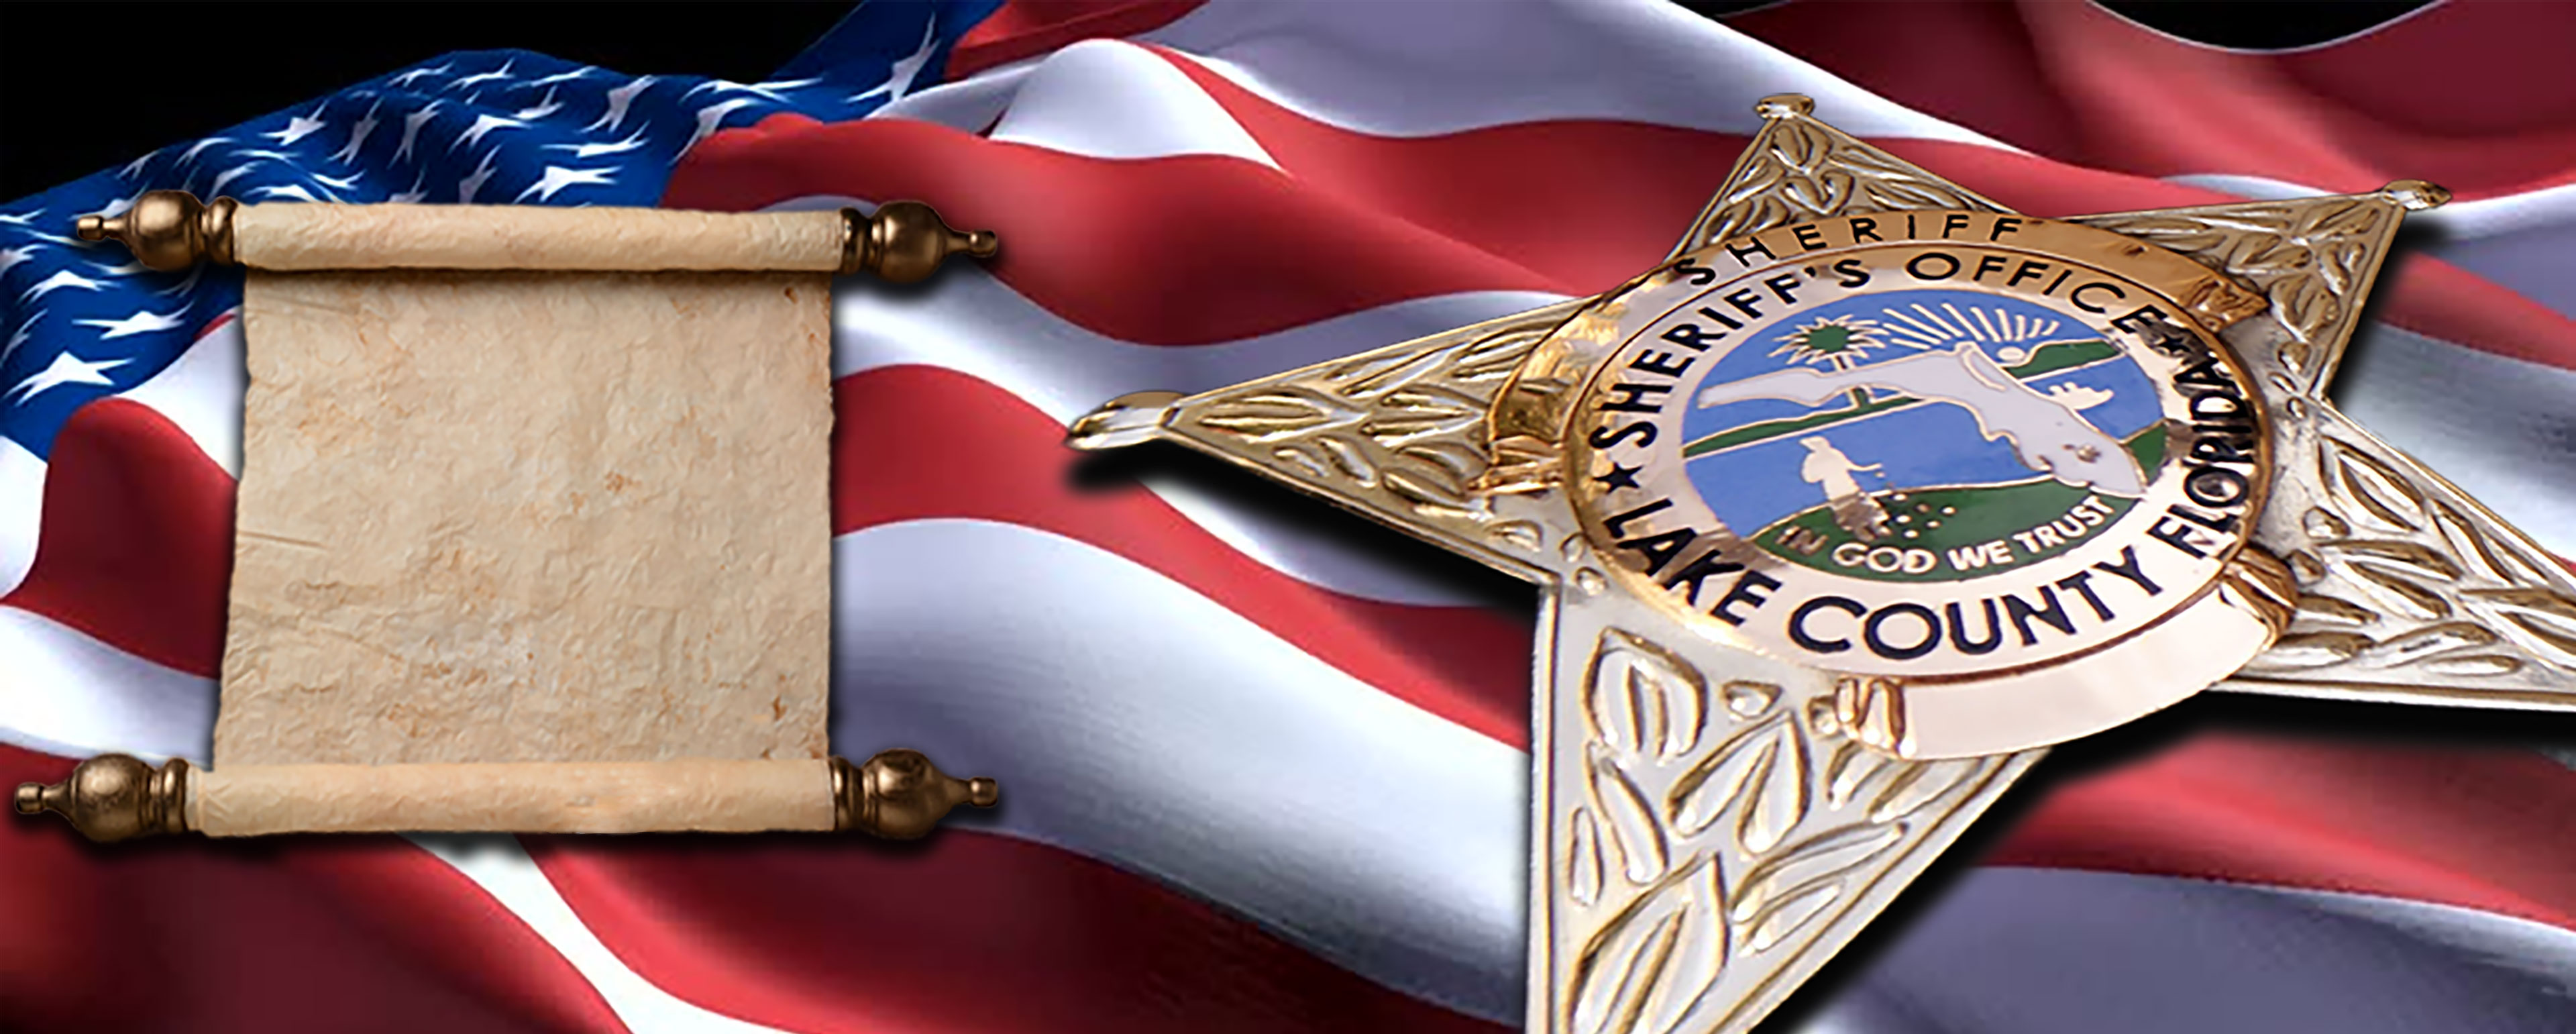 Ruffled American flag with Oath of office scroll and close up of Sheriff badge in foreground